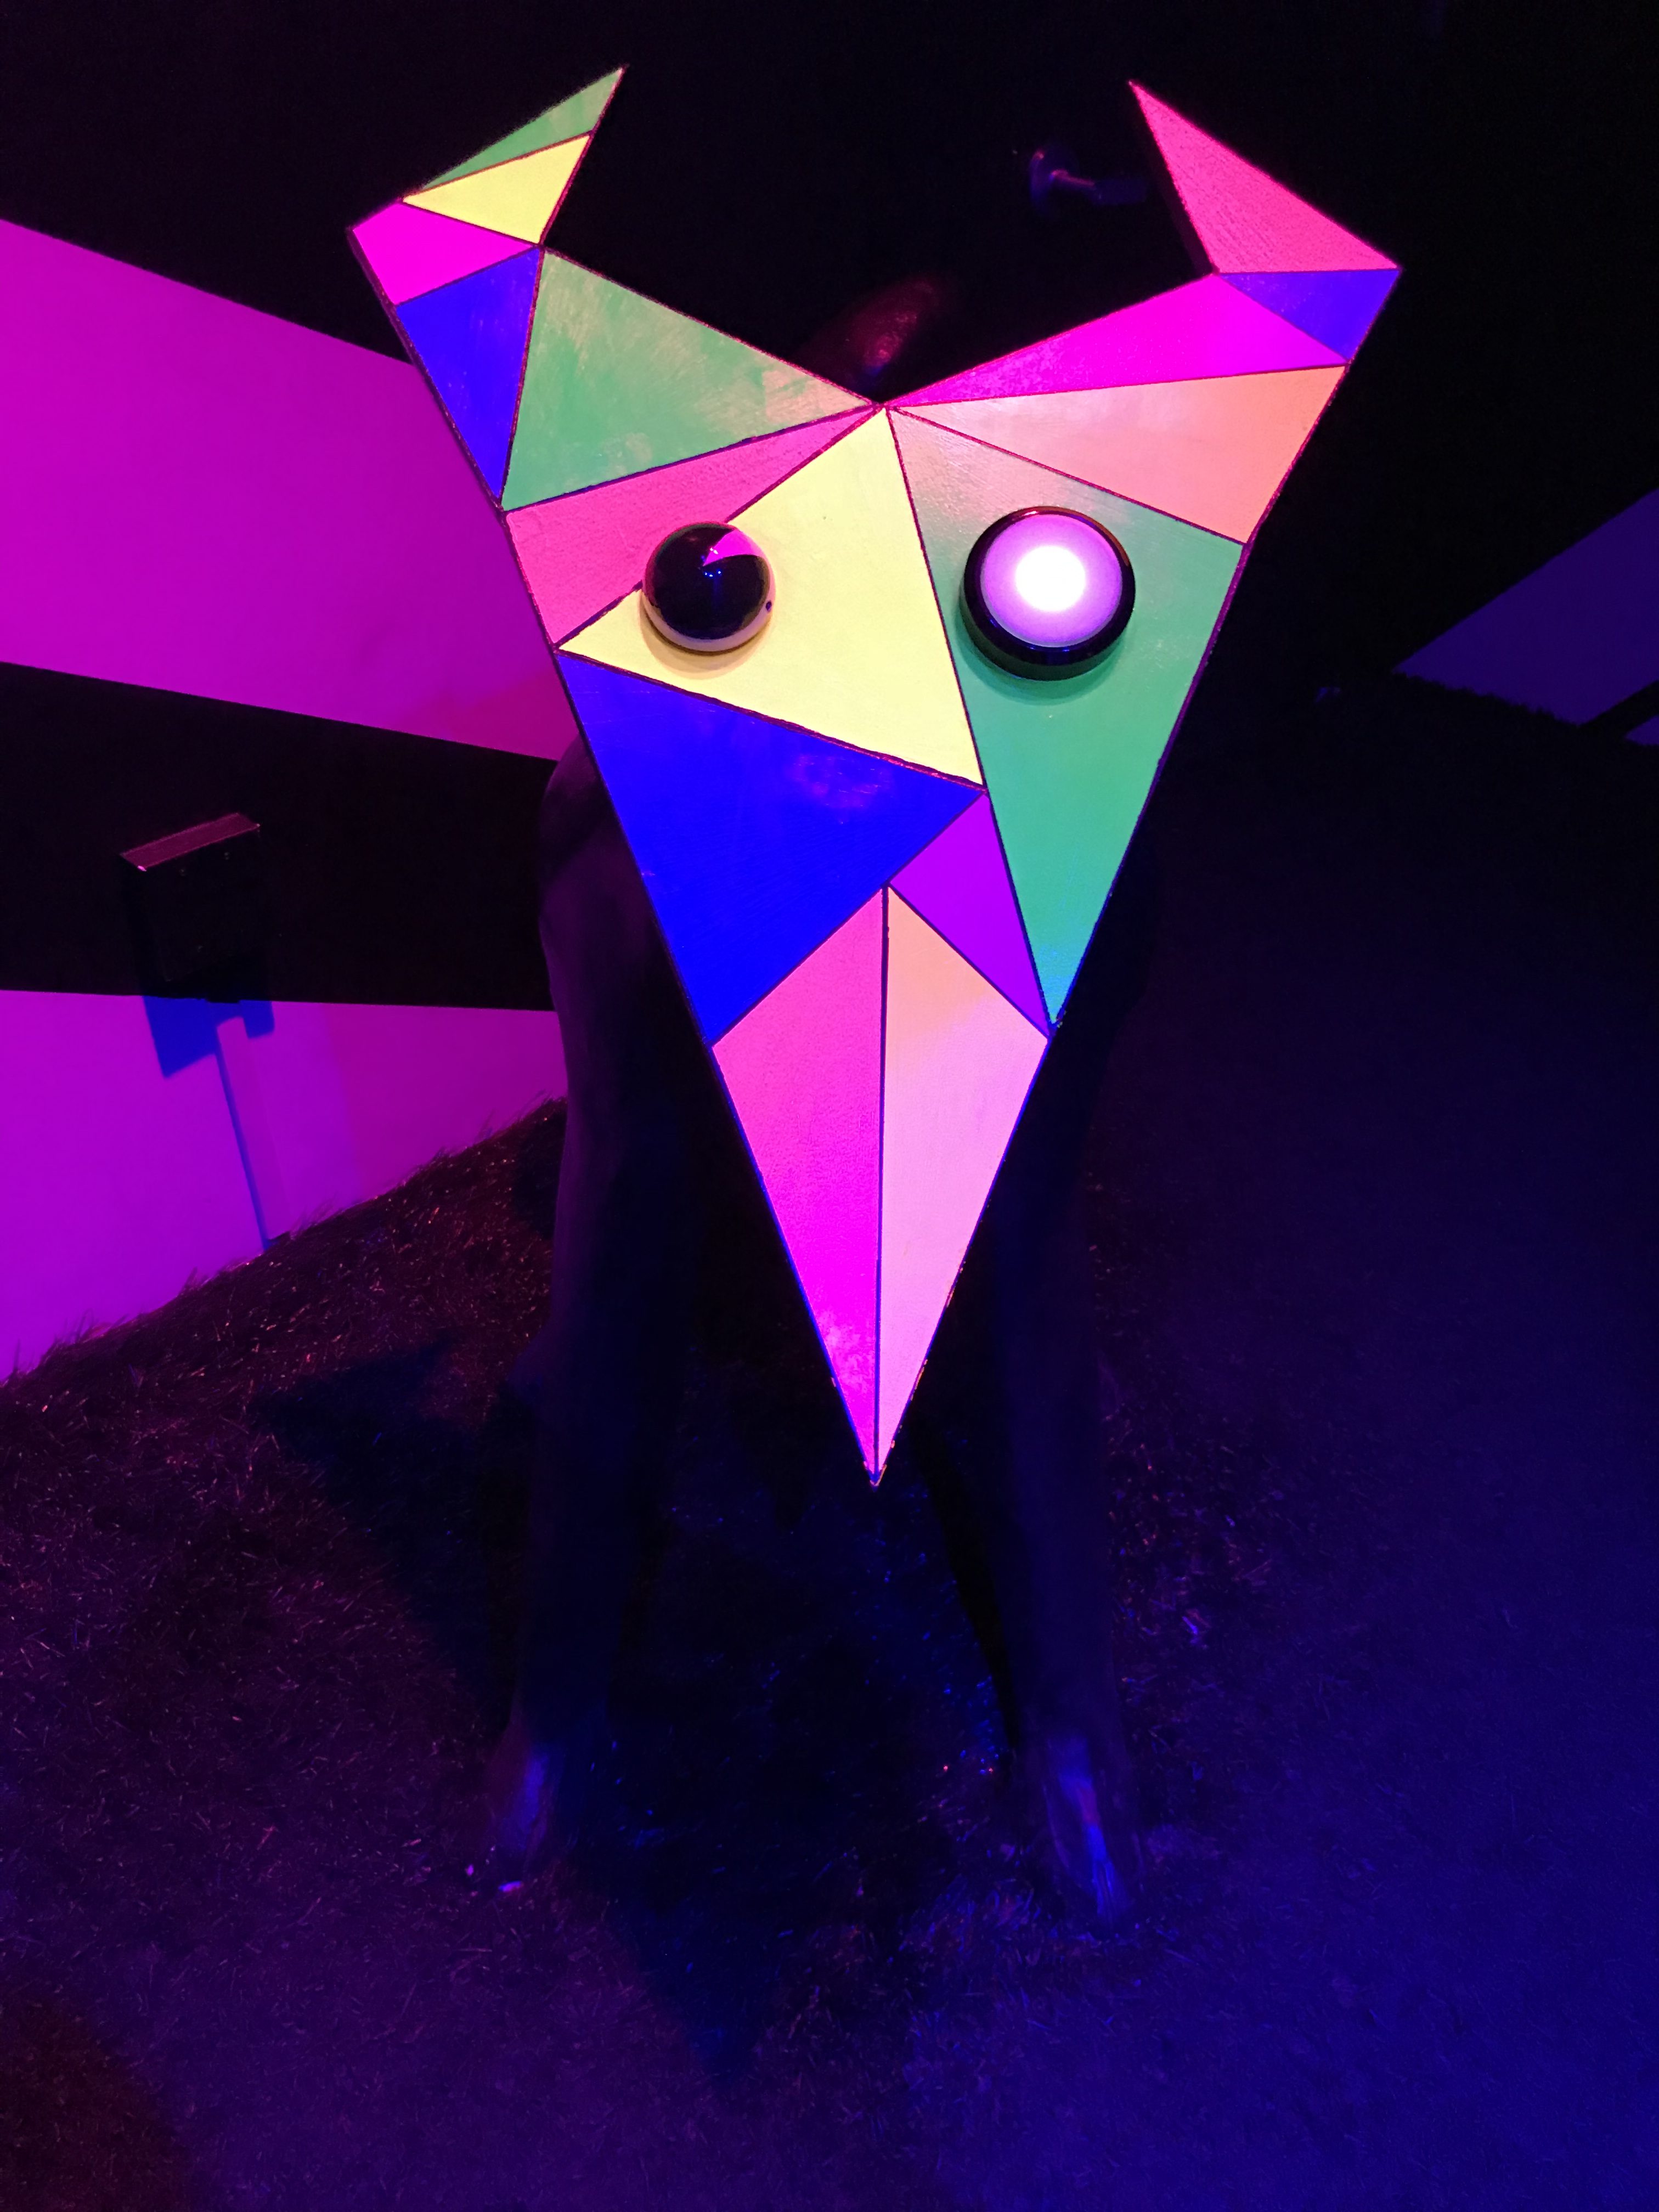 sculpture from Meow Wolf - doglike creature with triangular face and prismatic rainbow coloration